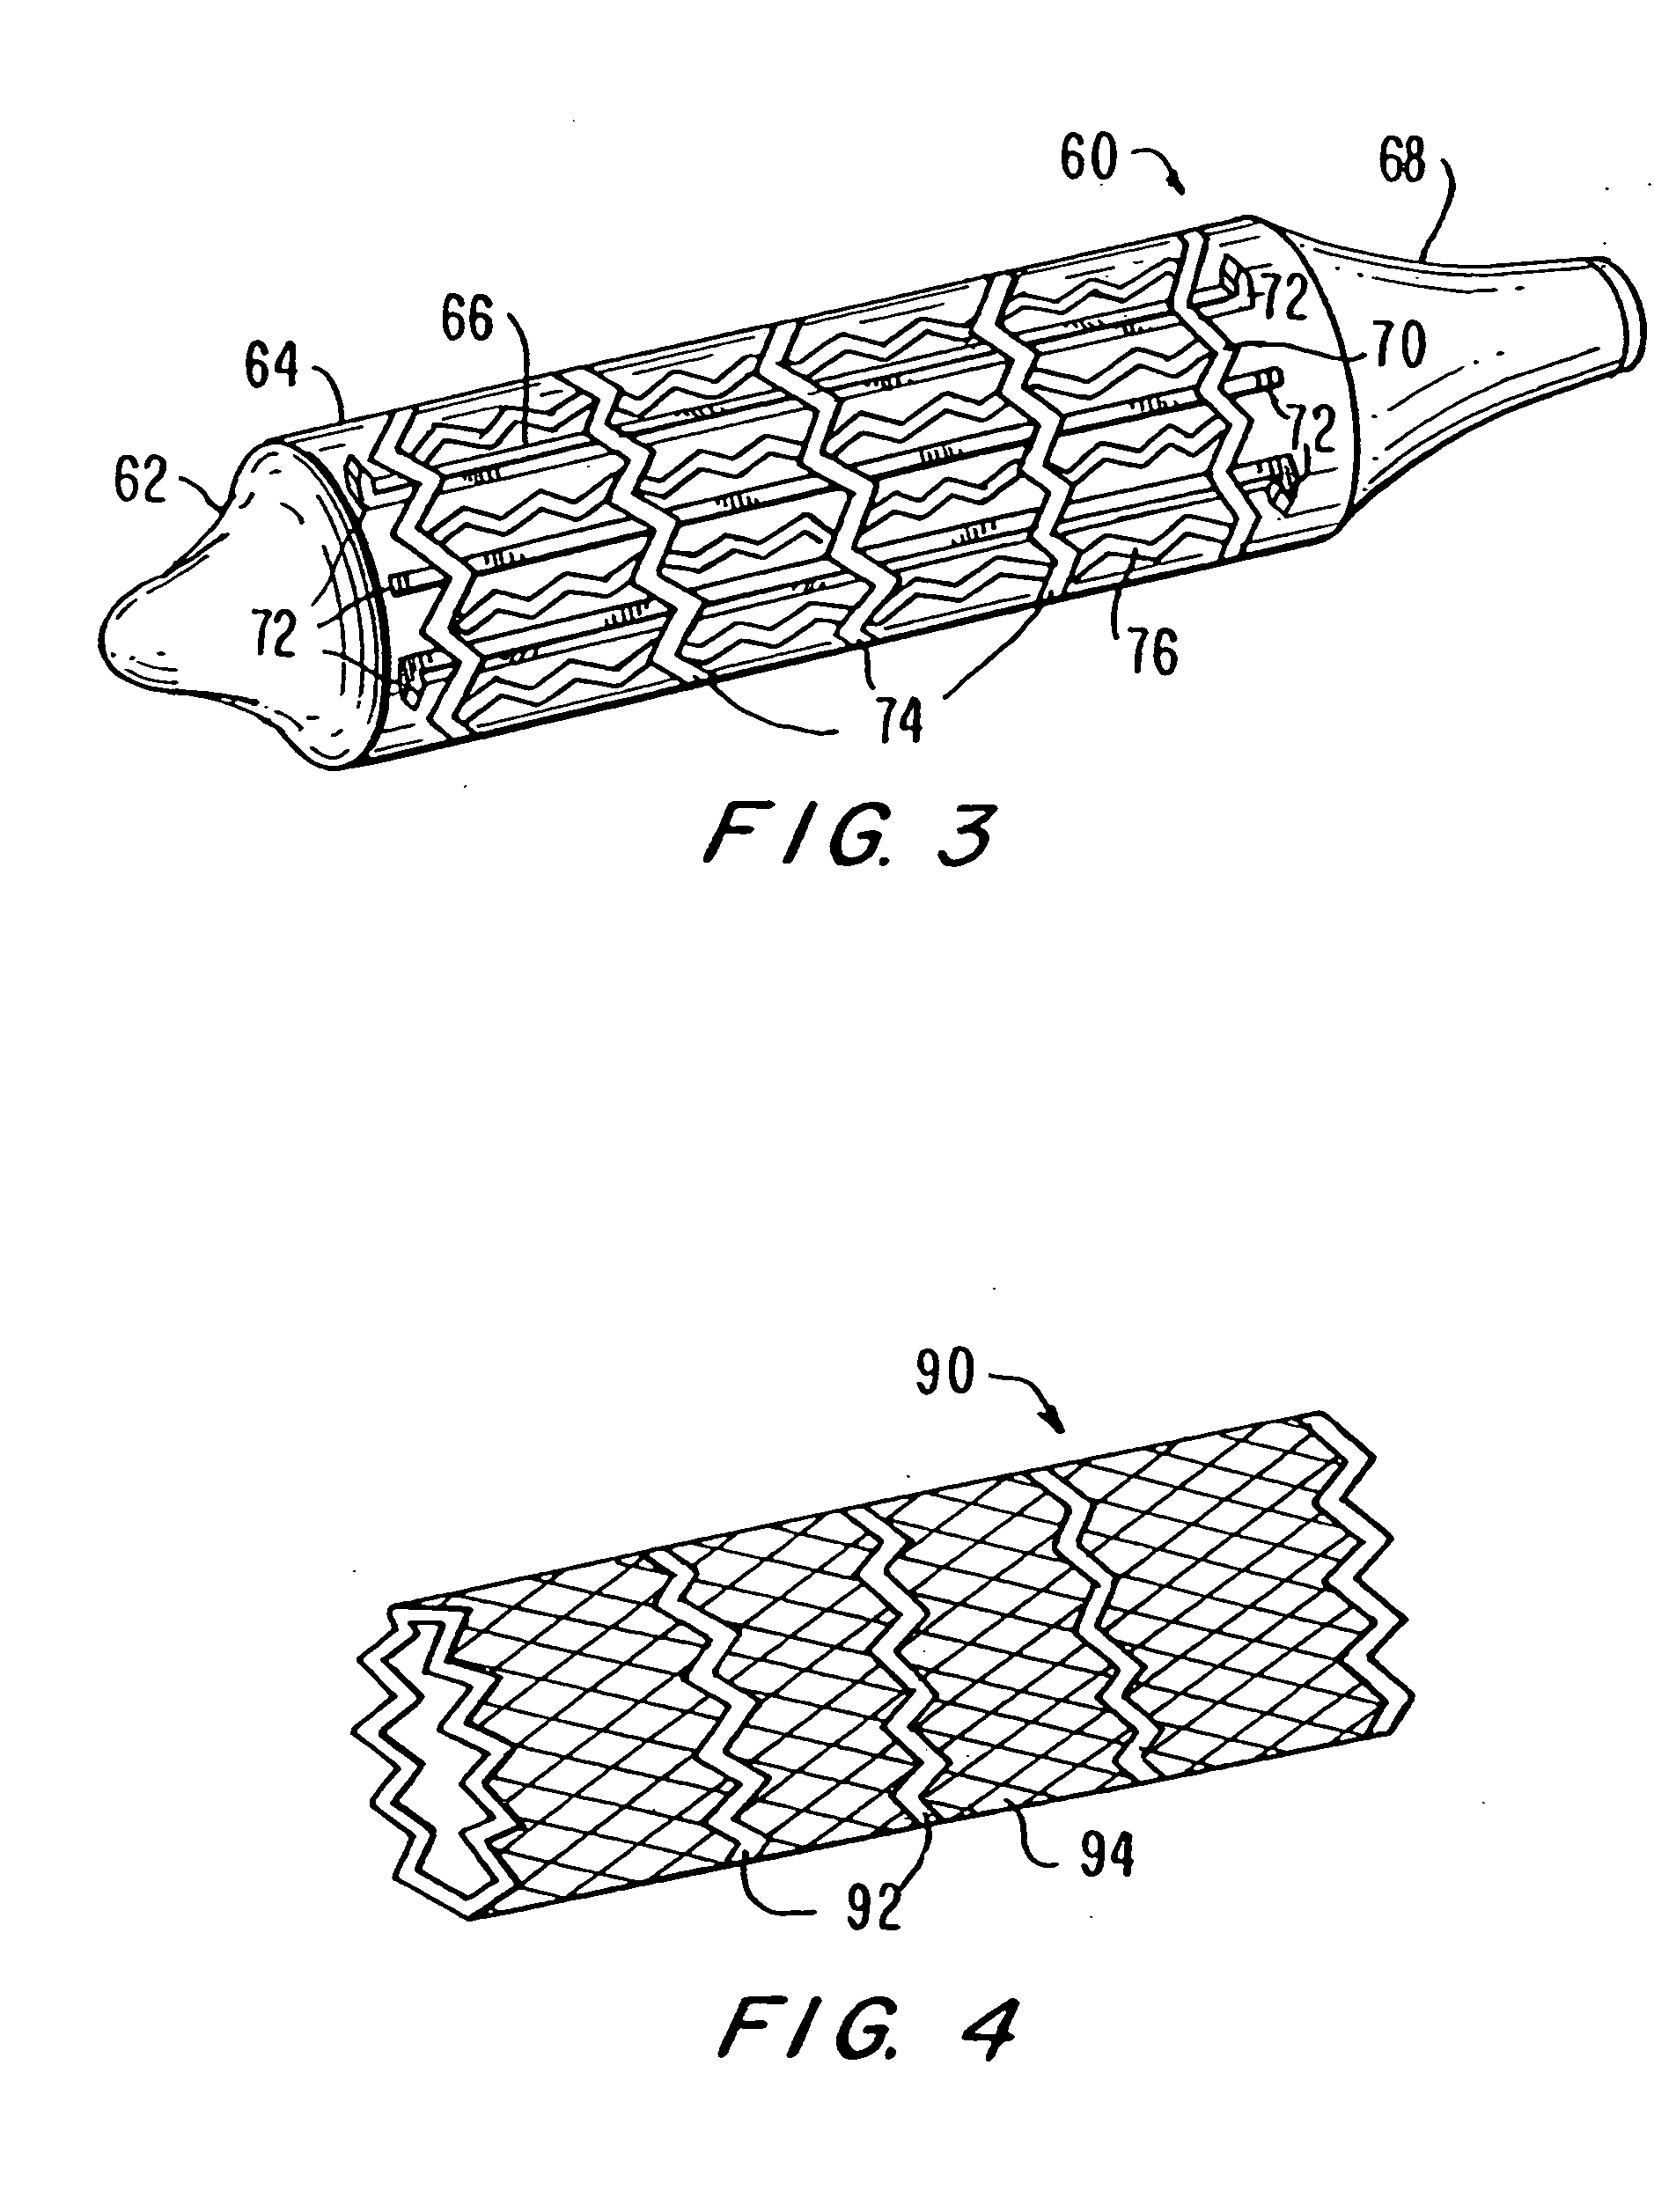 Stiffened balloon catheter for dilatation and stenting